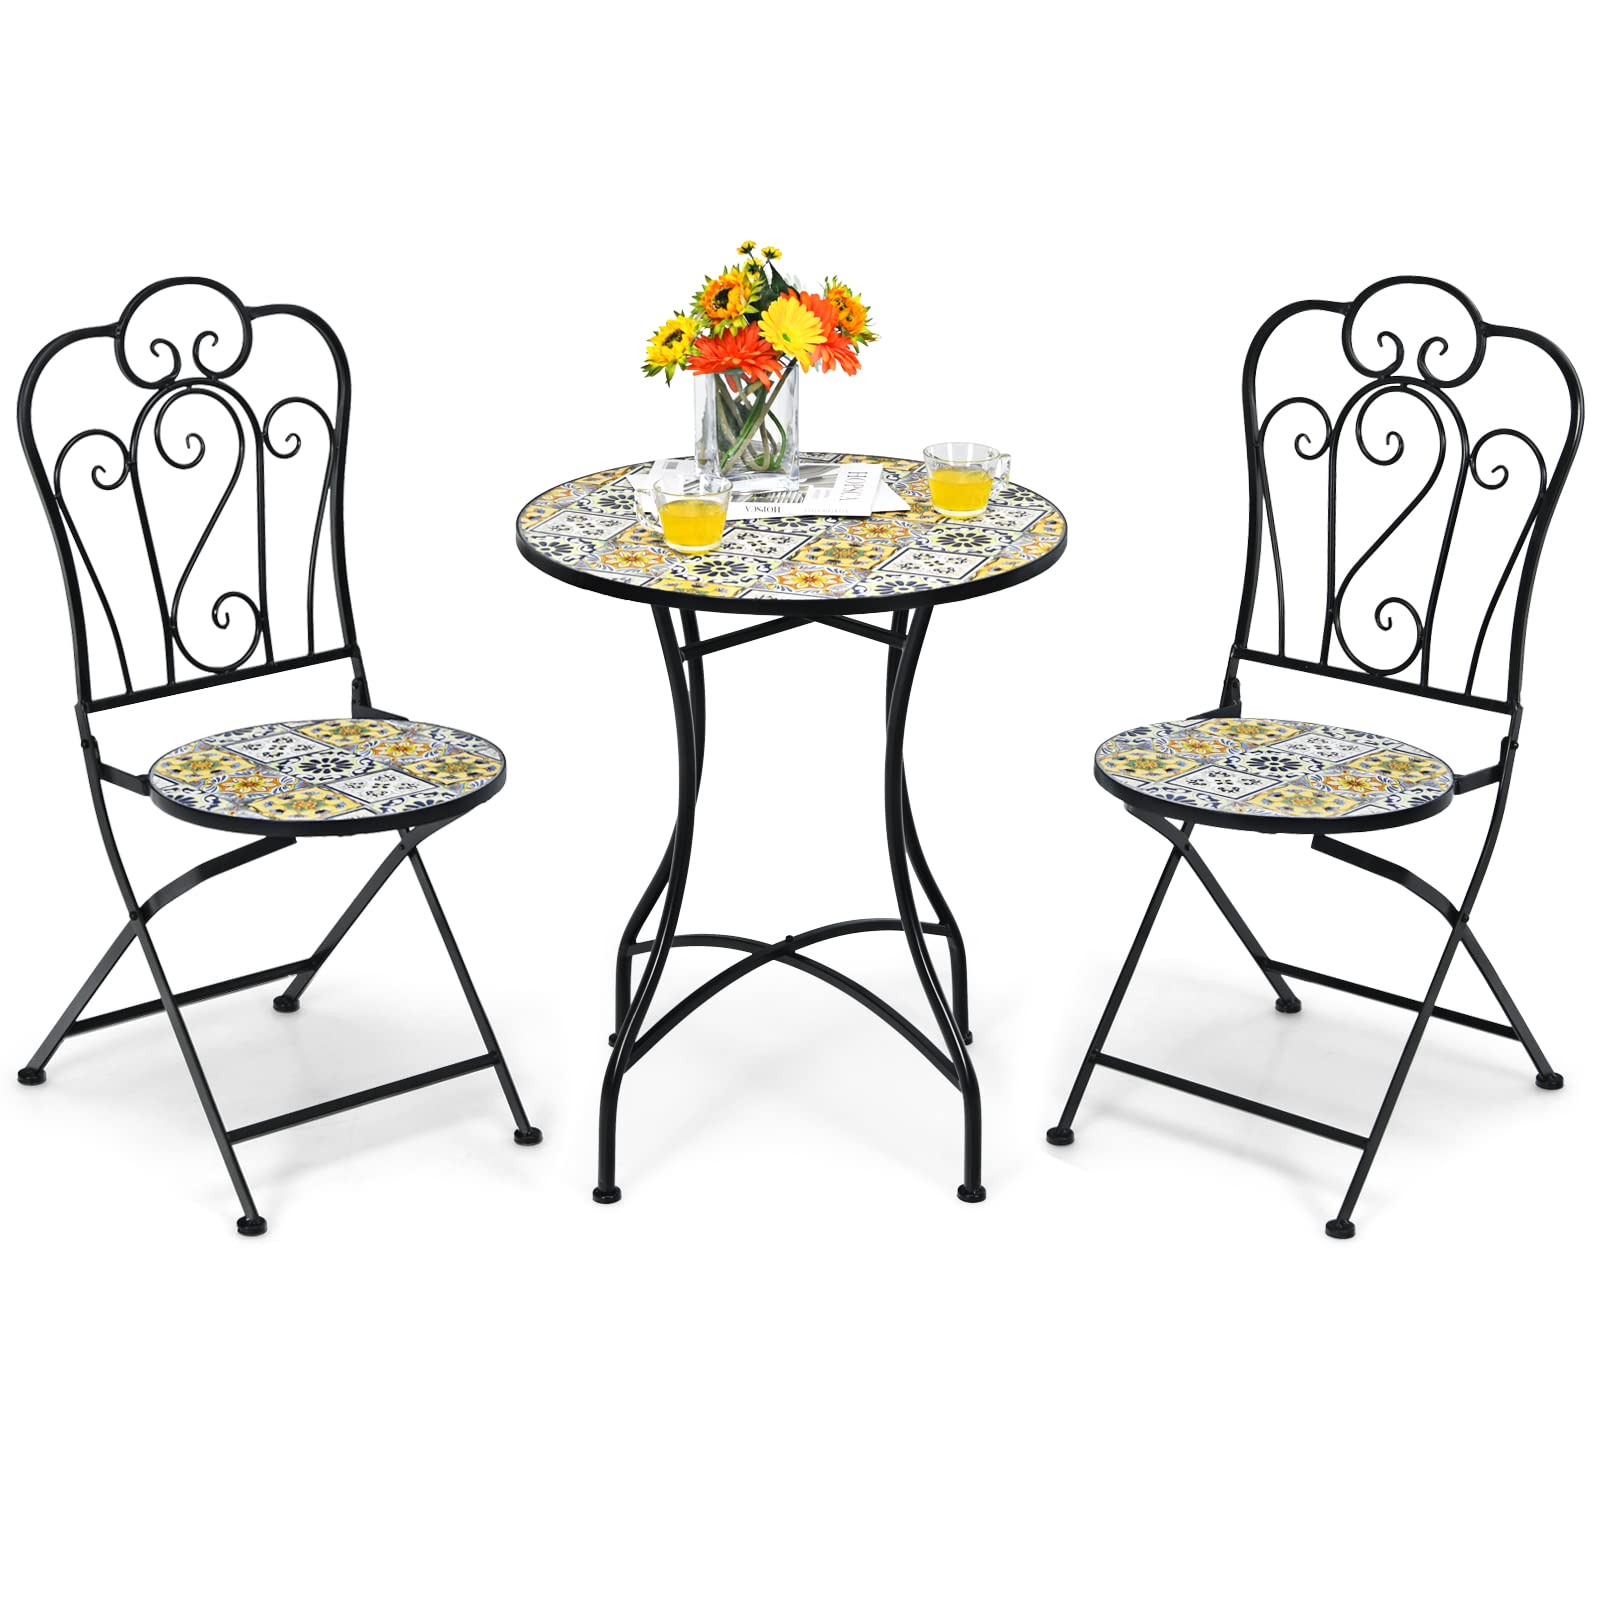 3-Piece Patio Bistro Set, Garden Dining Set, Round Table and 2 Patio Folding Chairs